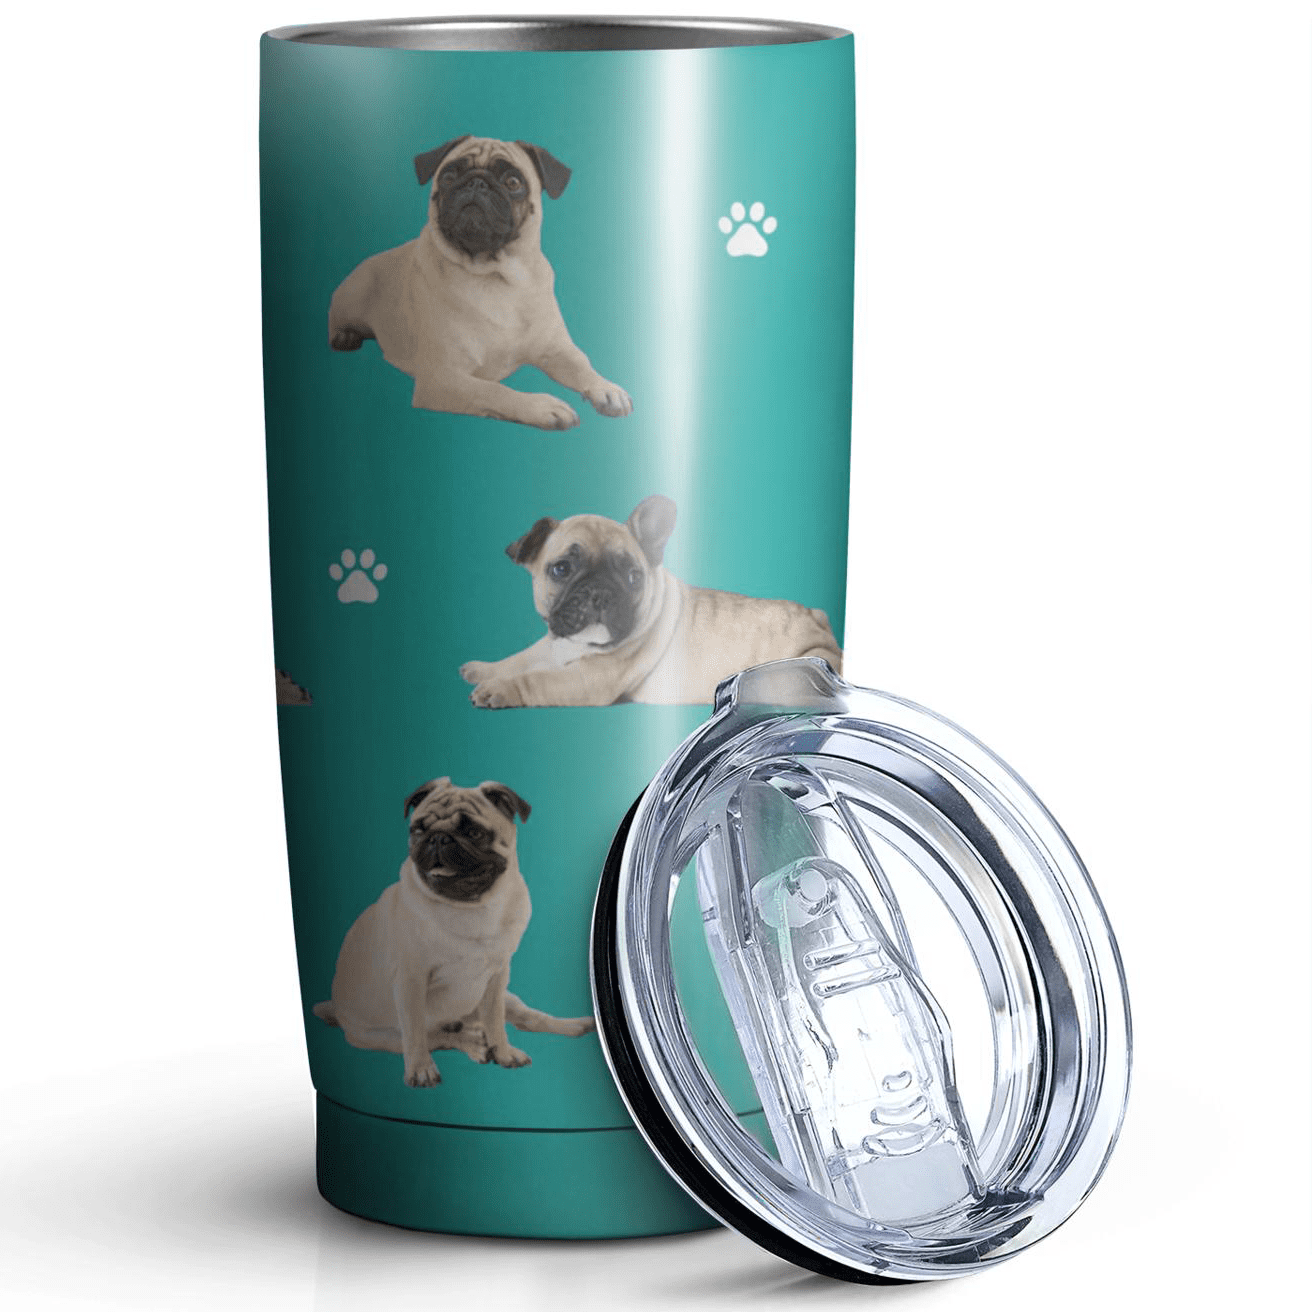 Puppy Pals Insulated Travel Cup